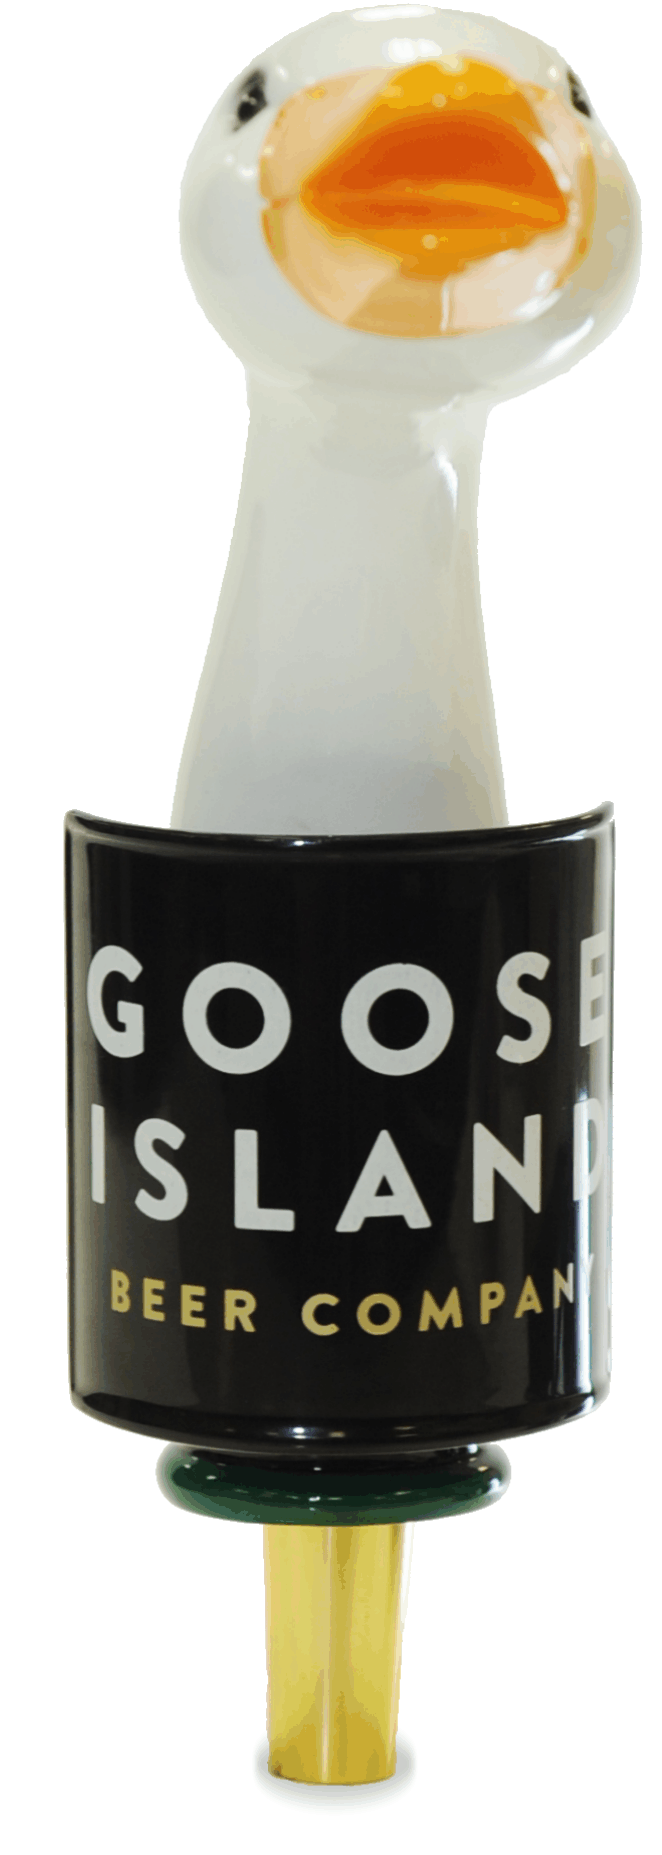 Goose Island IPA has a beverage tapper!